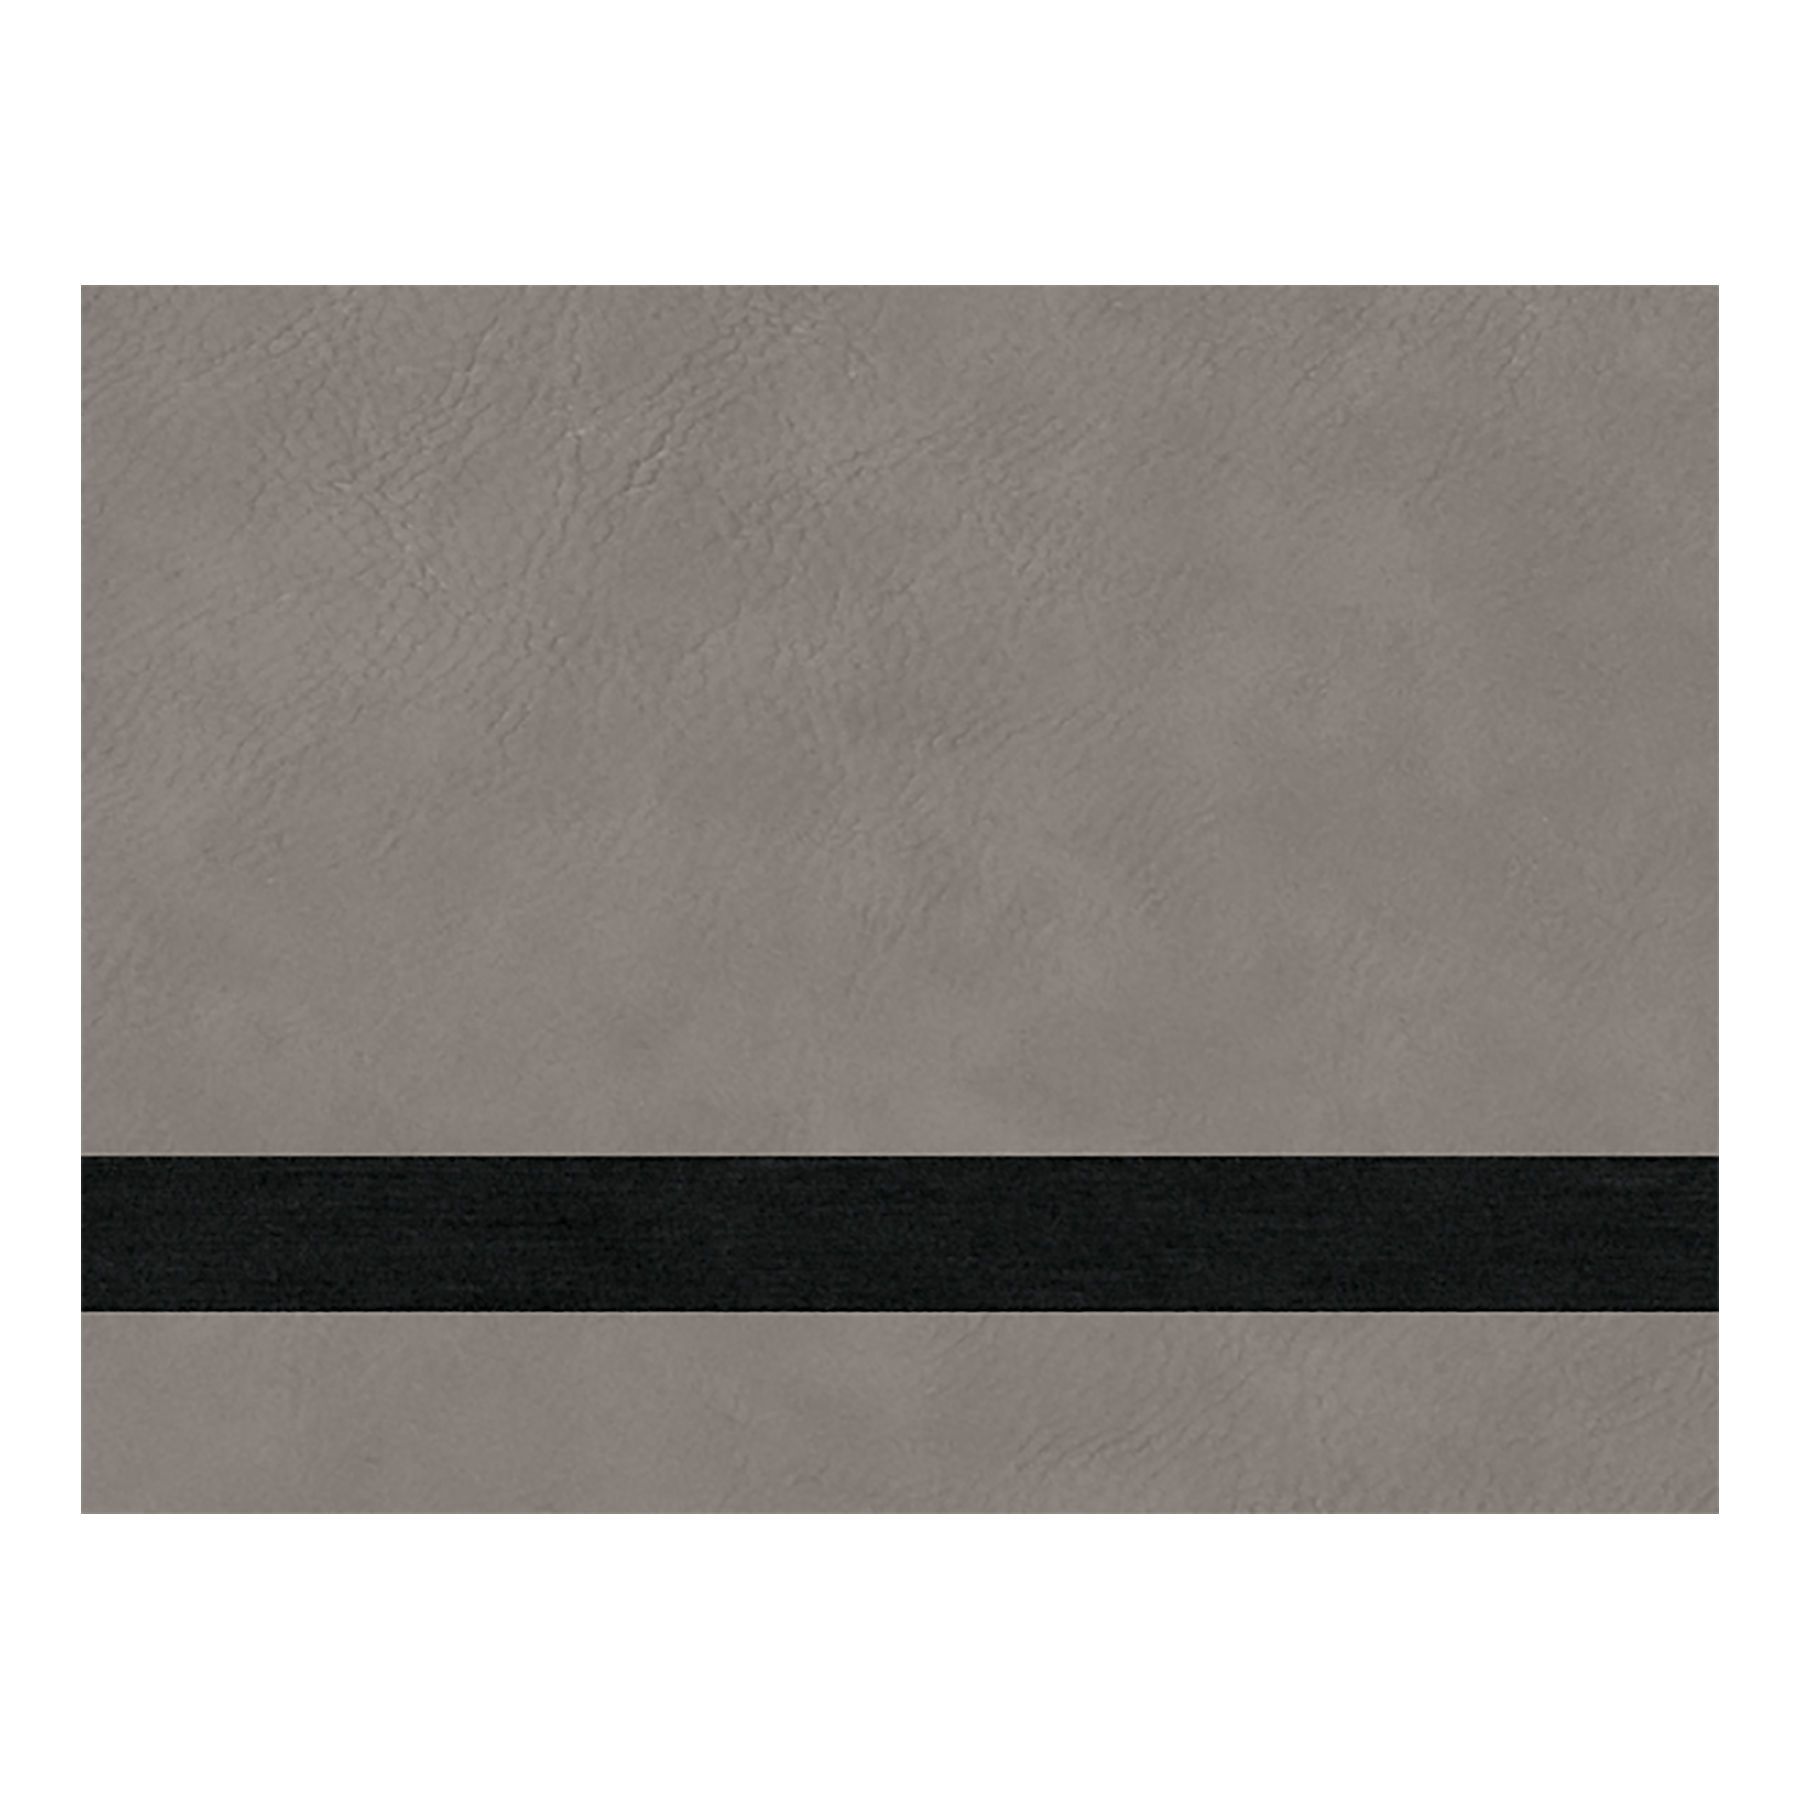 Sheet Stock w/Adhesive Backing, Laserable Leatherette, 6" x 9" Engraving Supplies Craftworks NW Gray/Black 